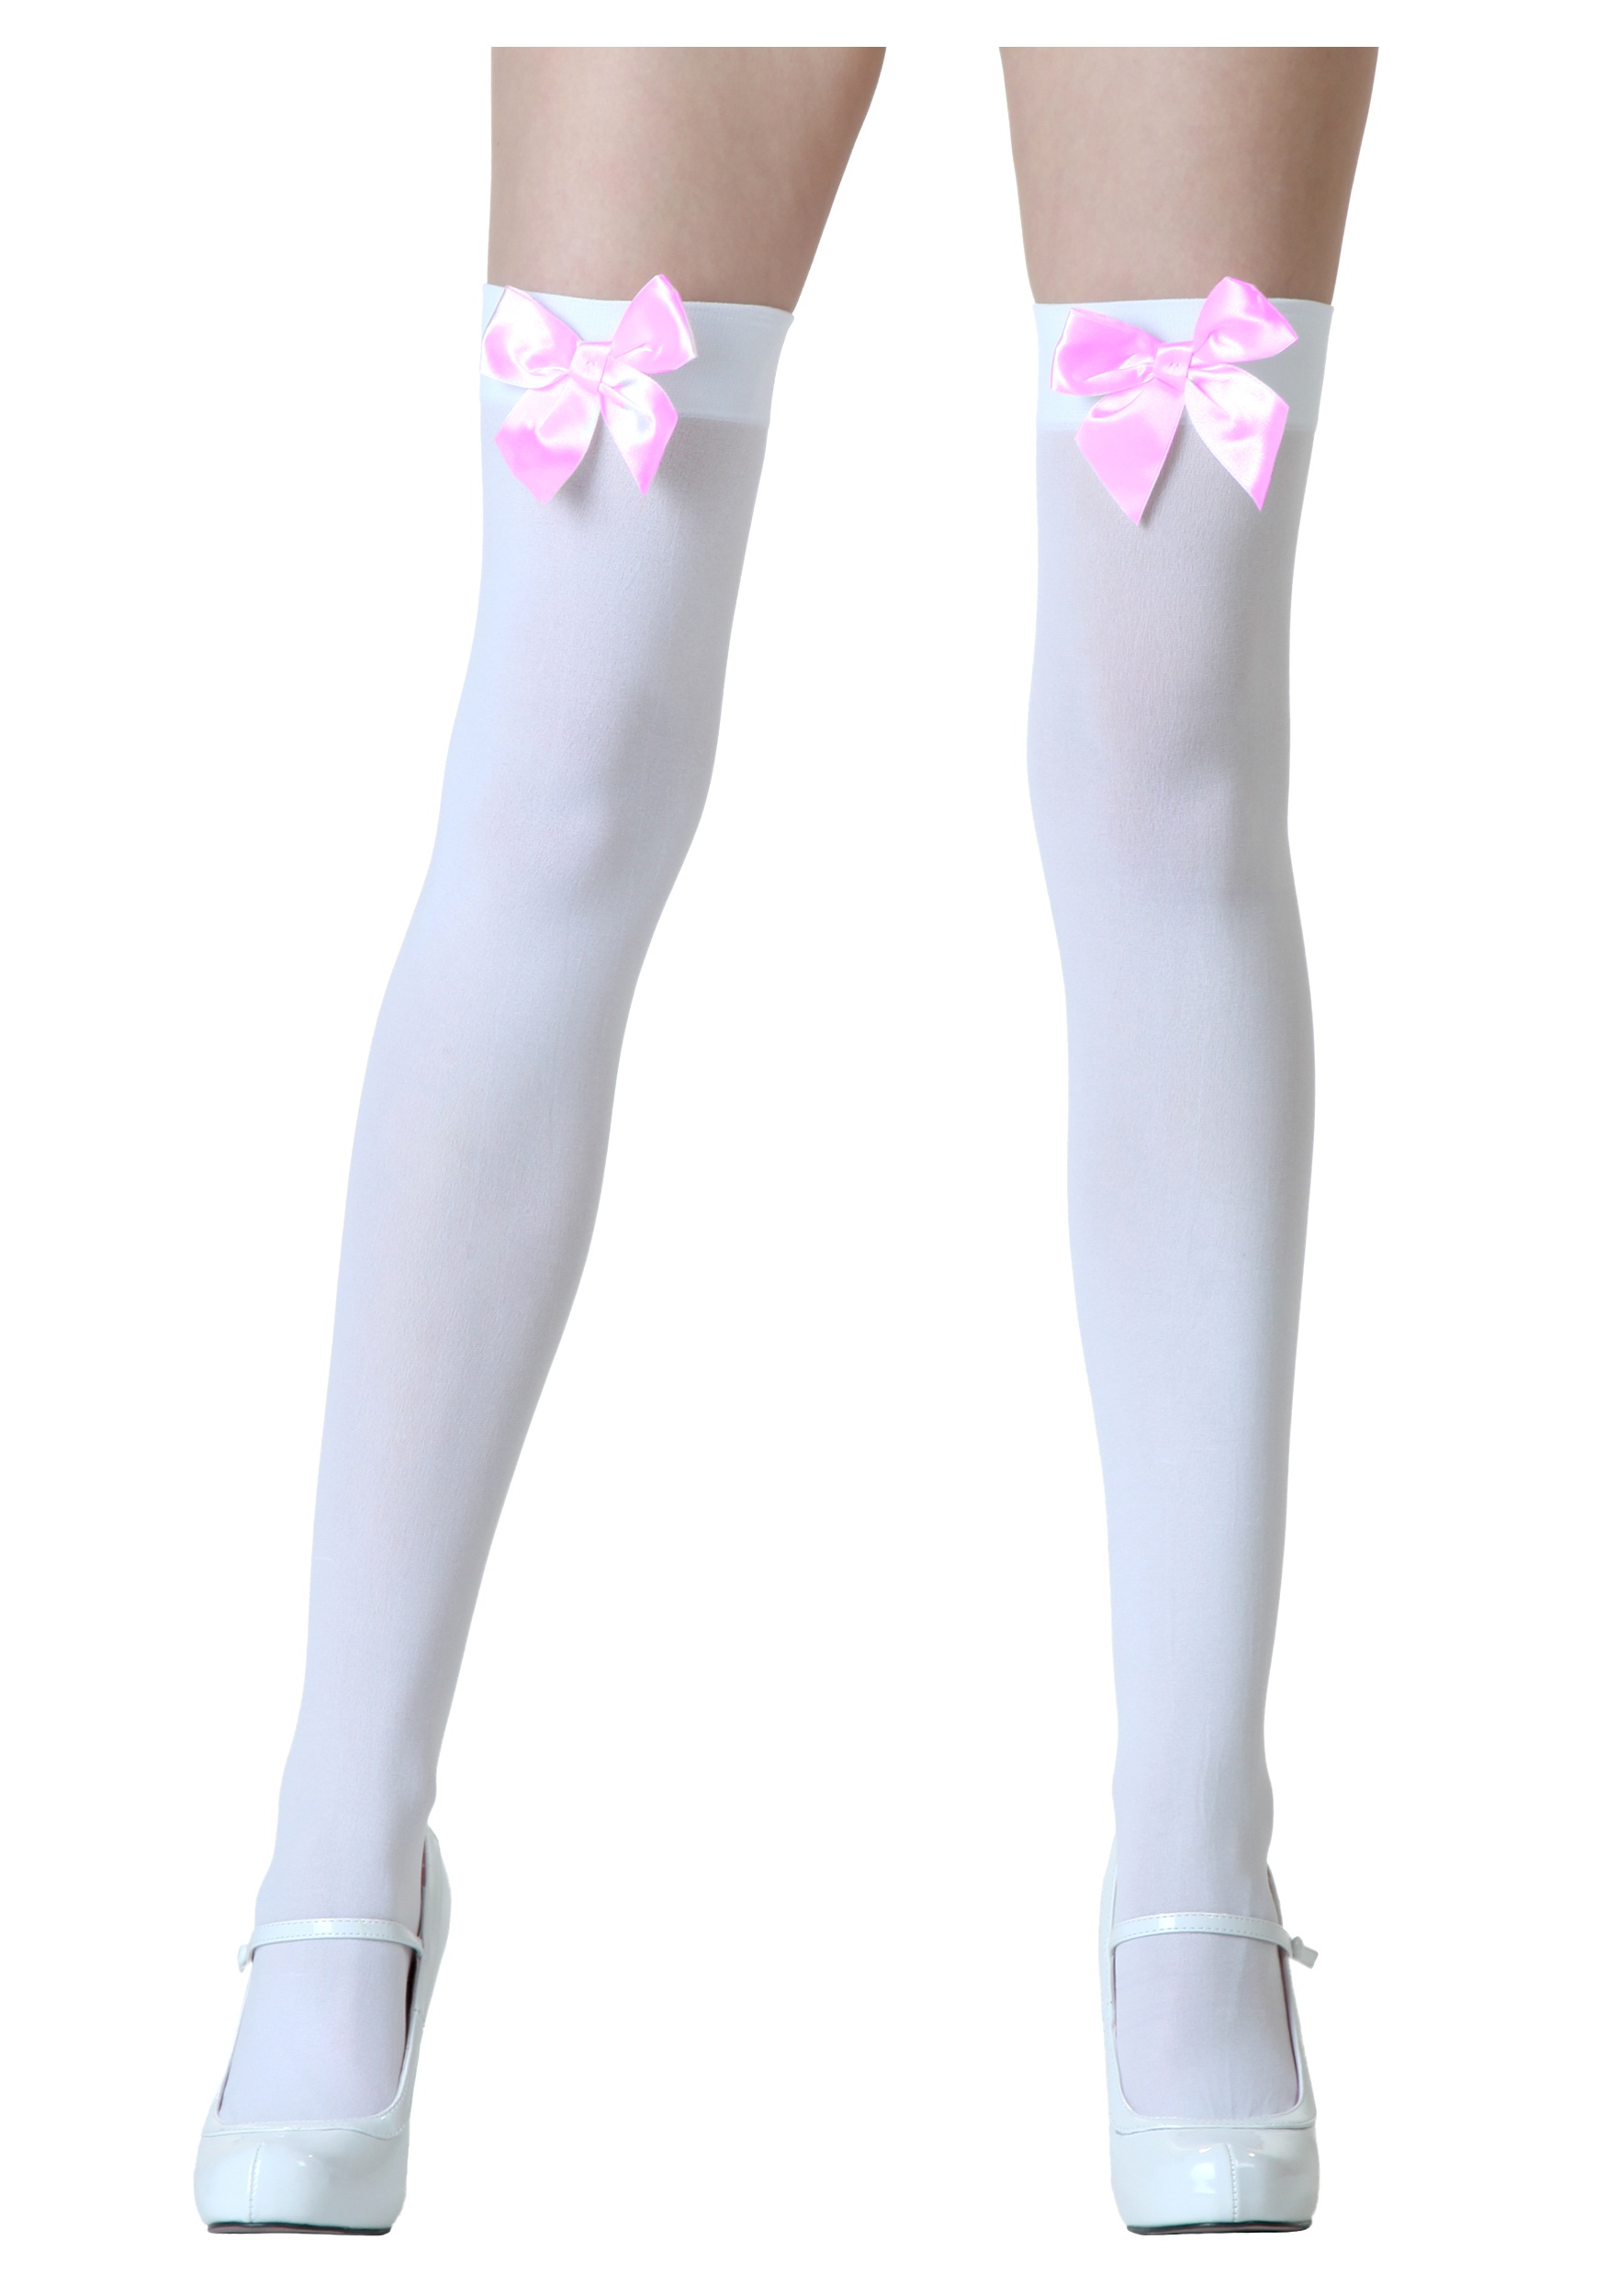 https://images.halloweencostumes.com/products/13702/1-1/white-stockings-with-pink-bows.jpg